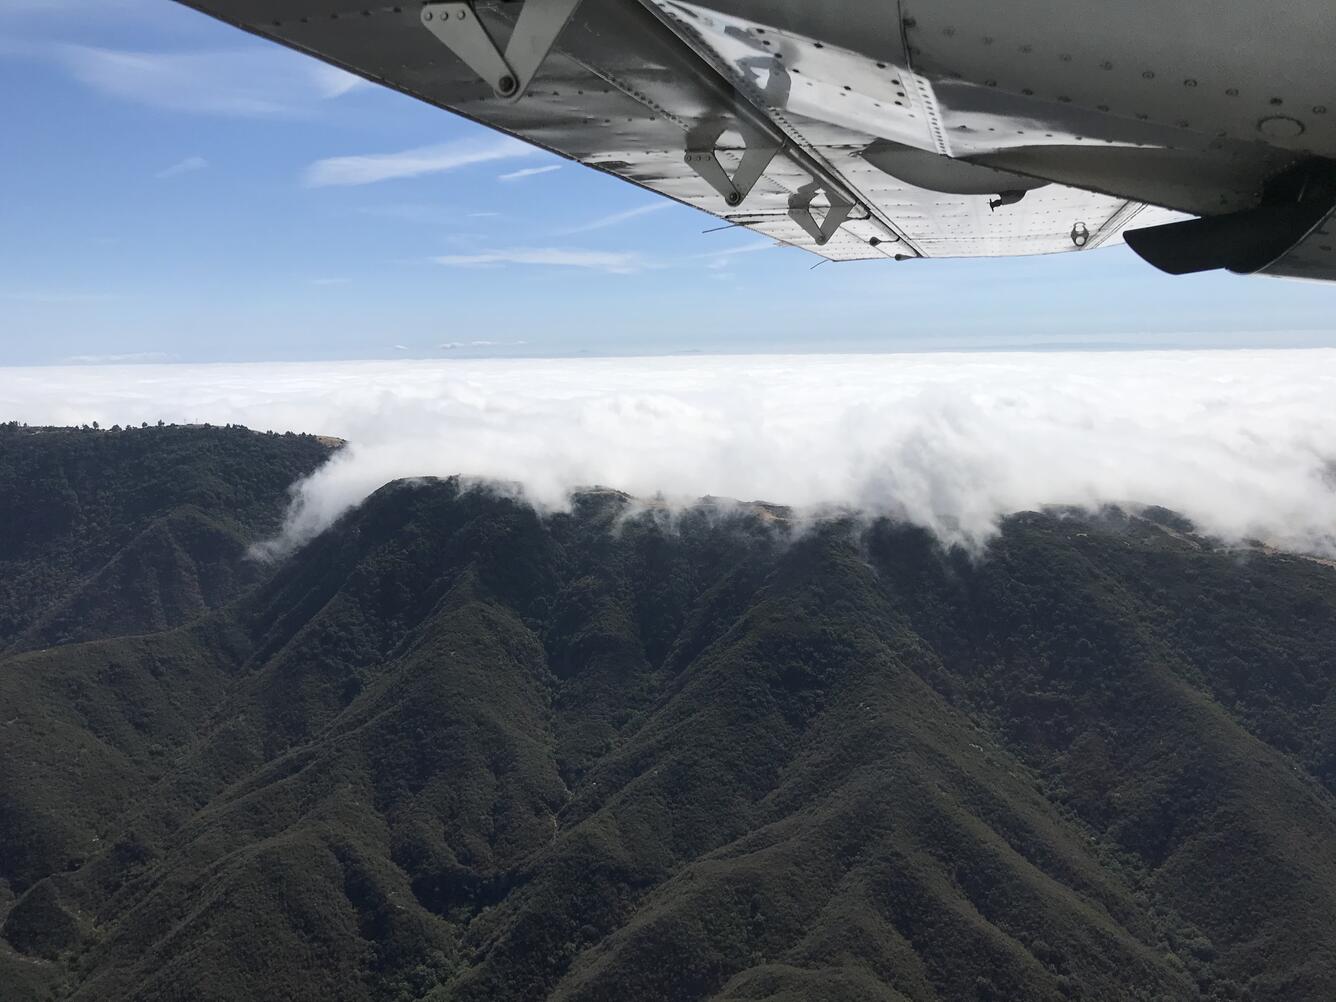 Fog over mountains viewed from the side of a plane